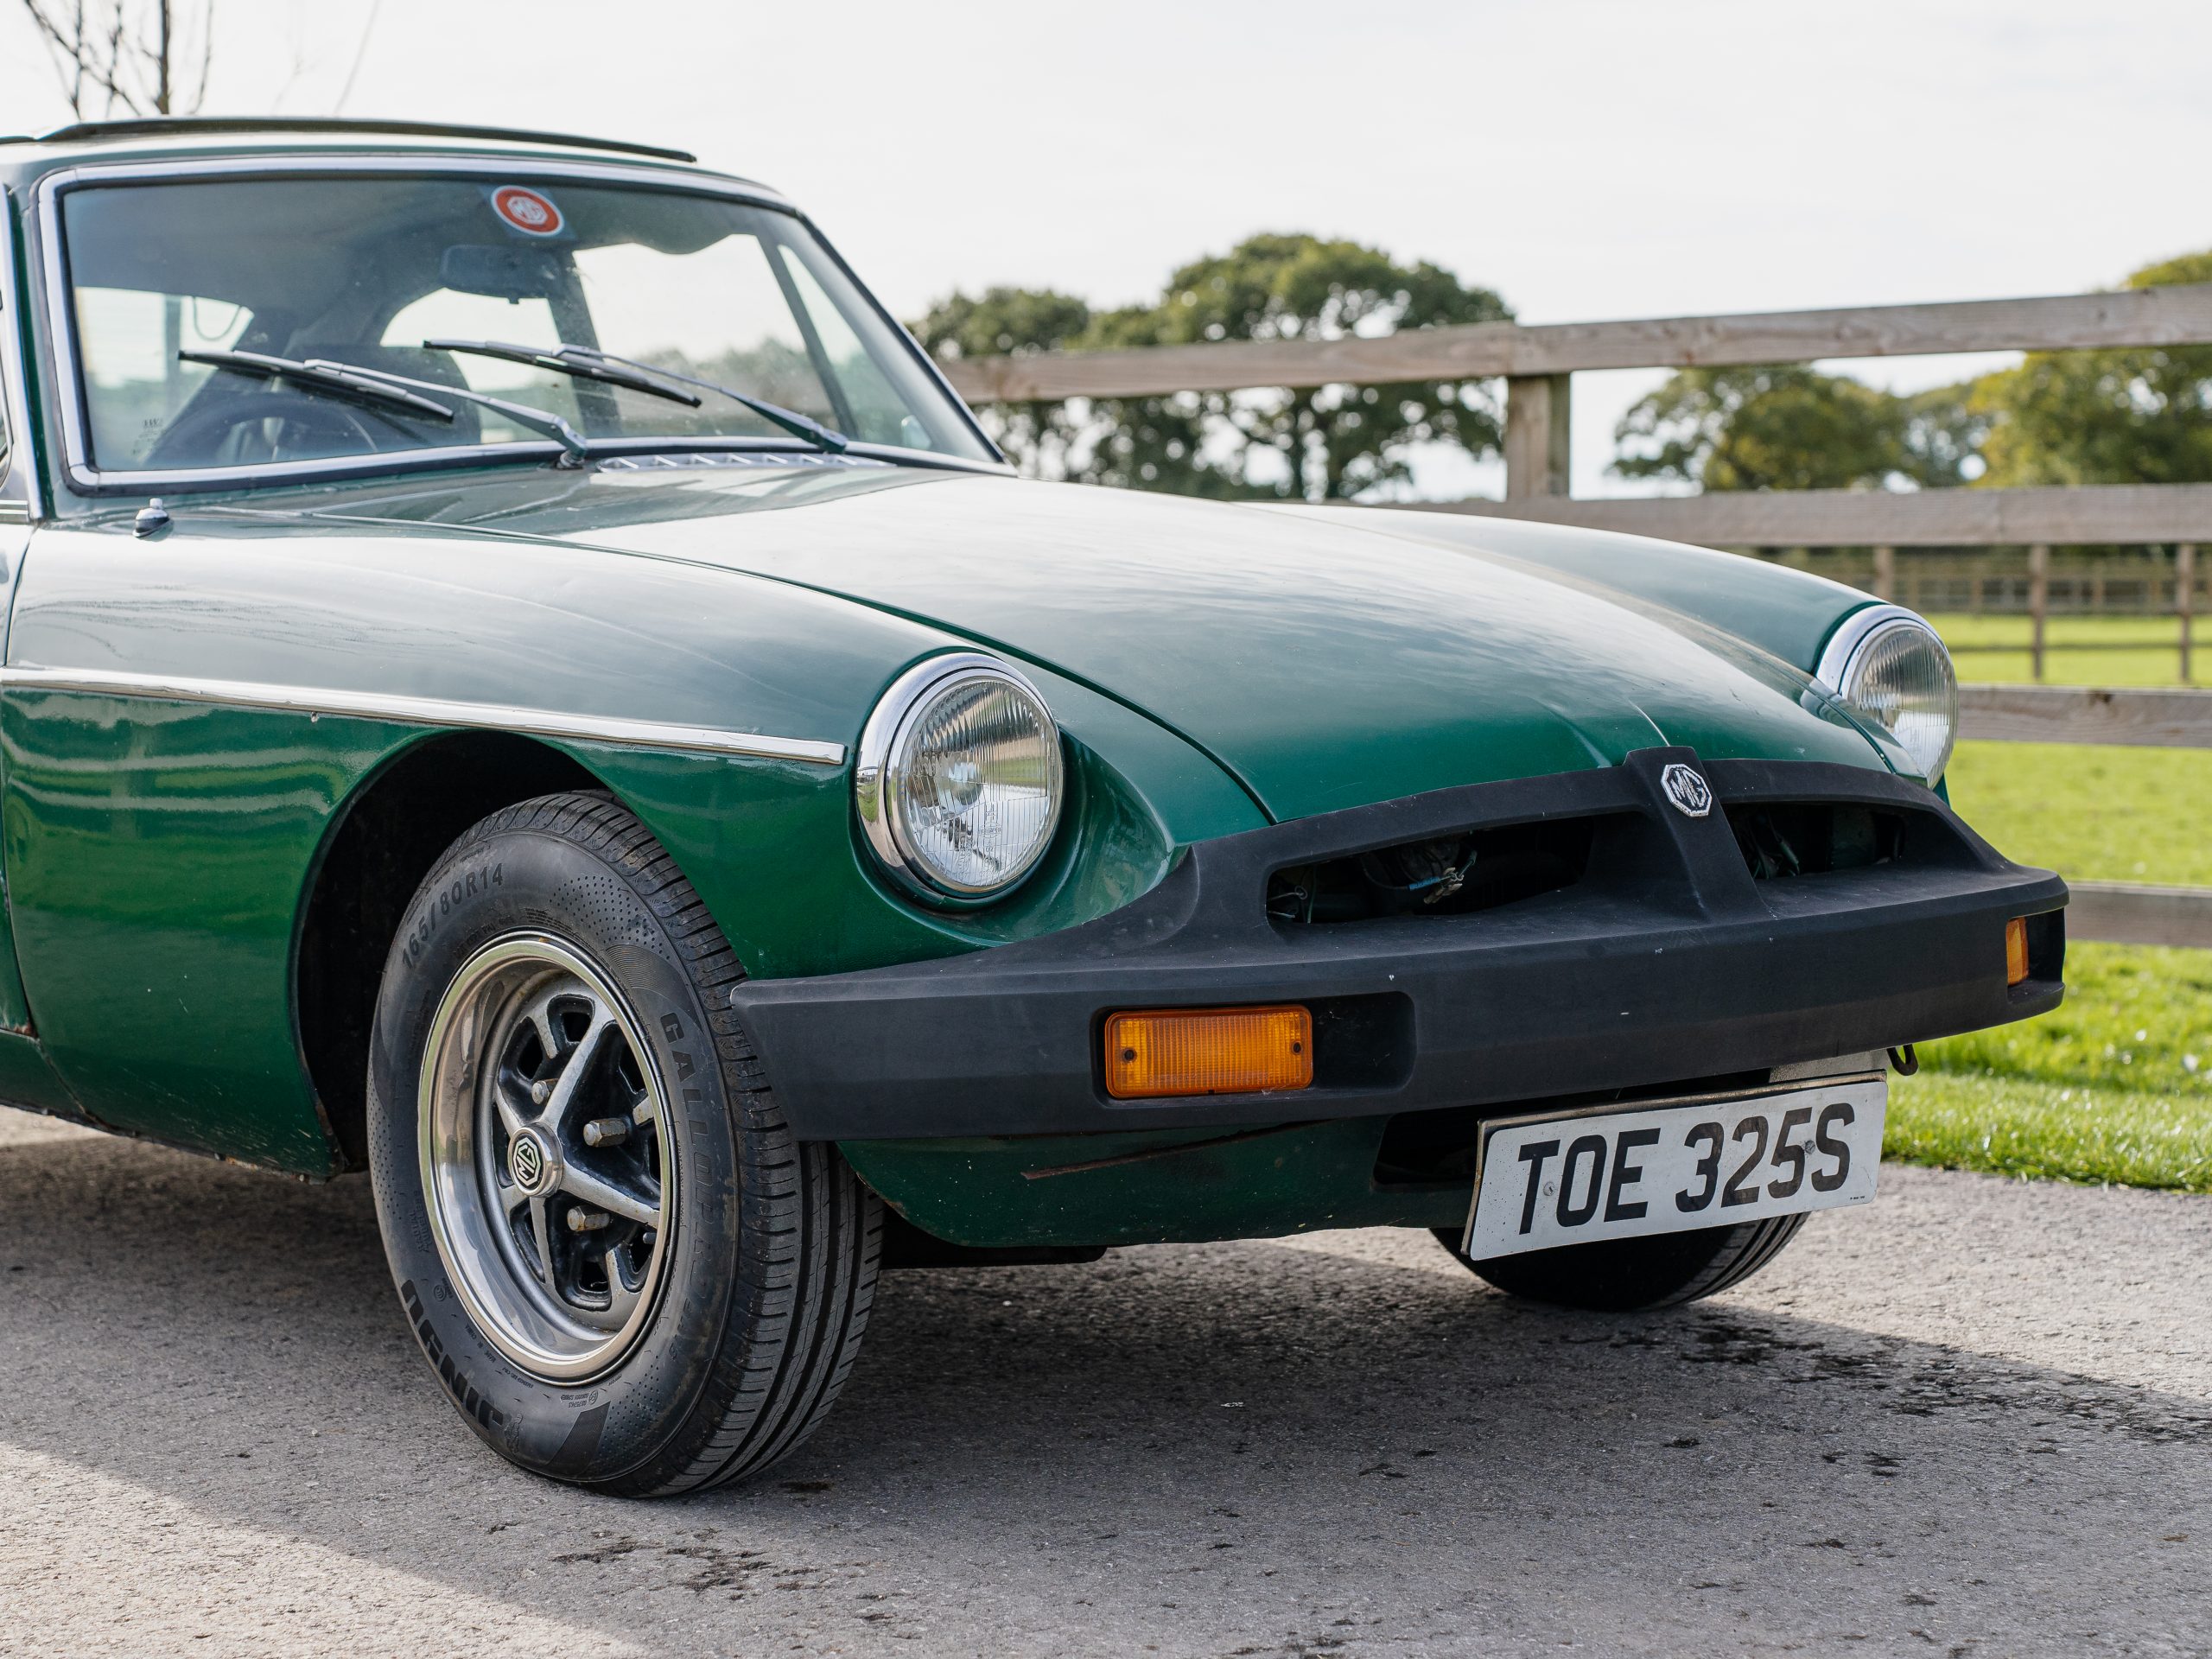 Spring forward with these five events, five roadtrips and five classics for £5000